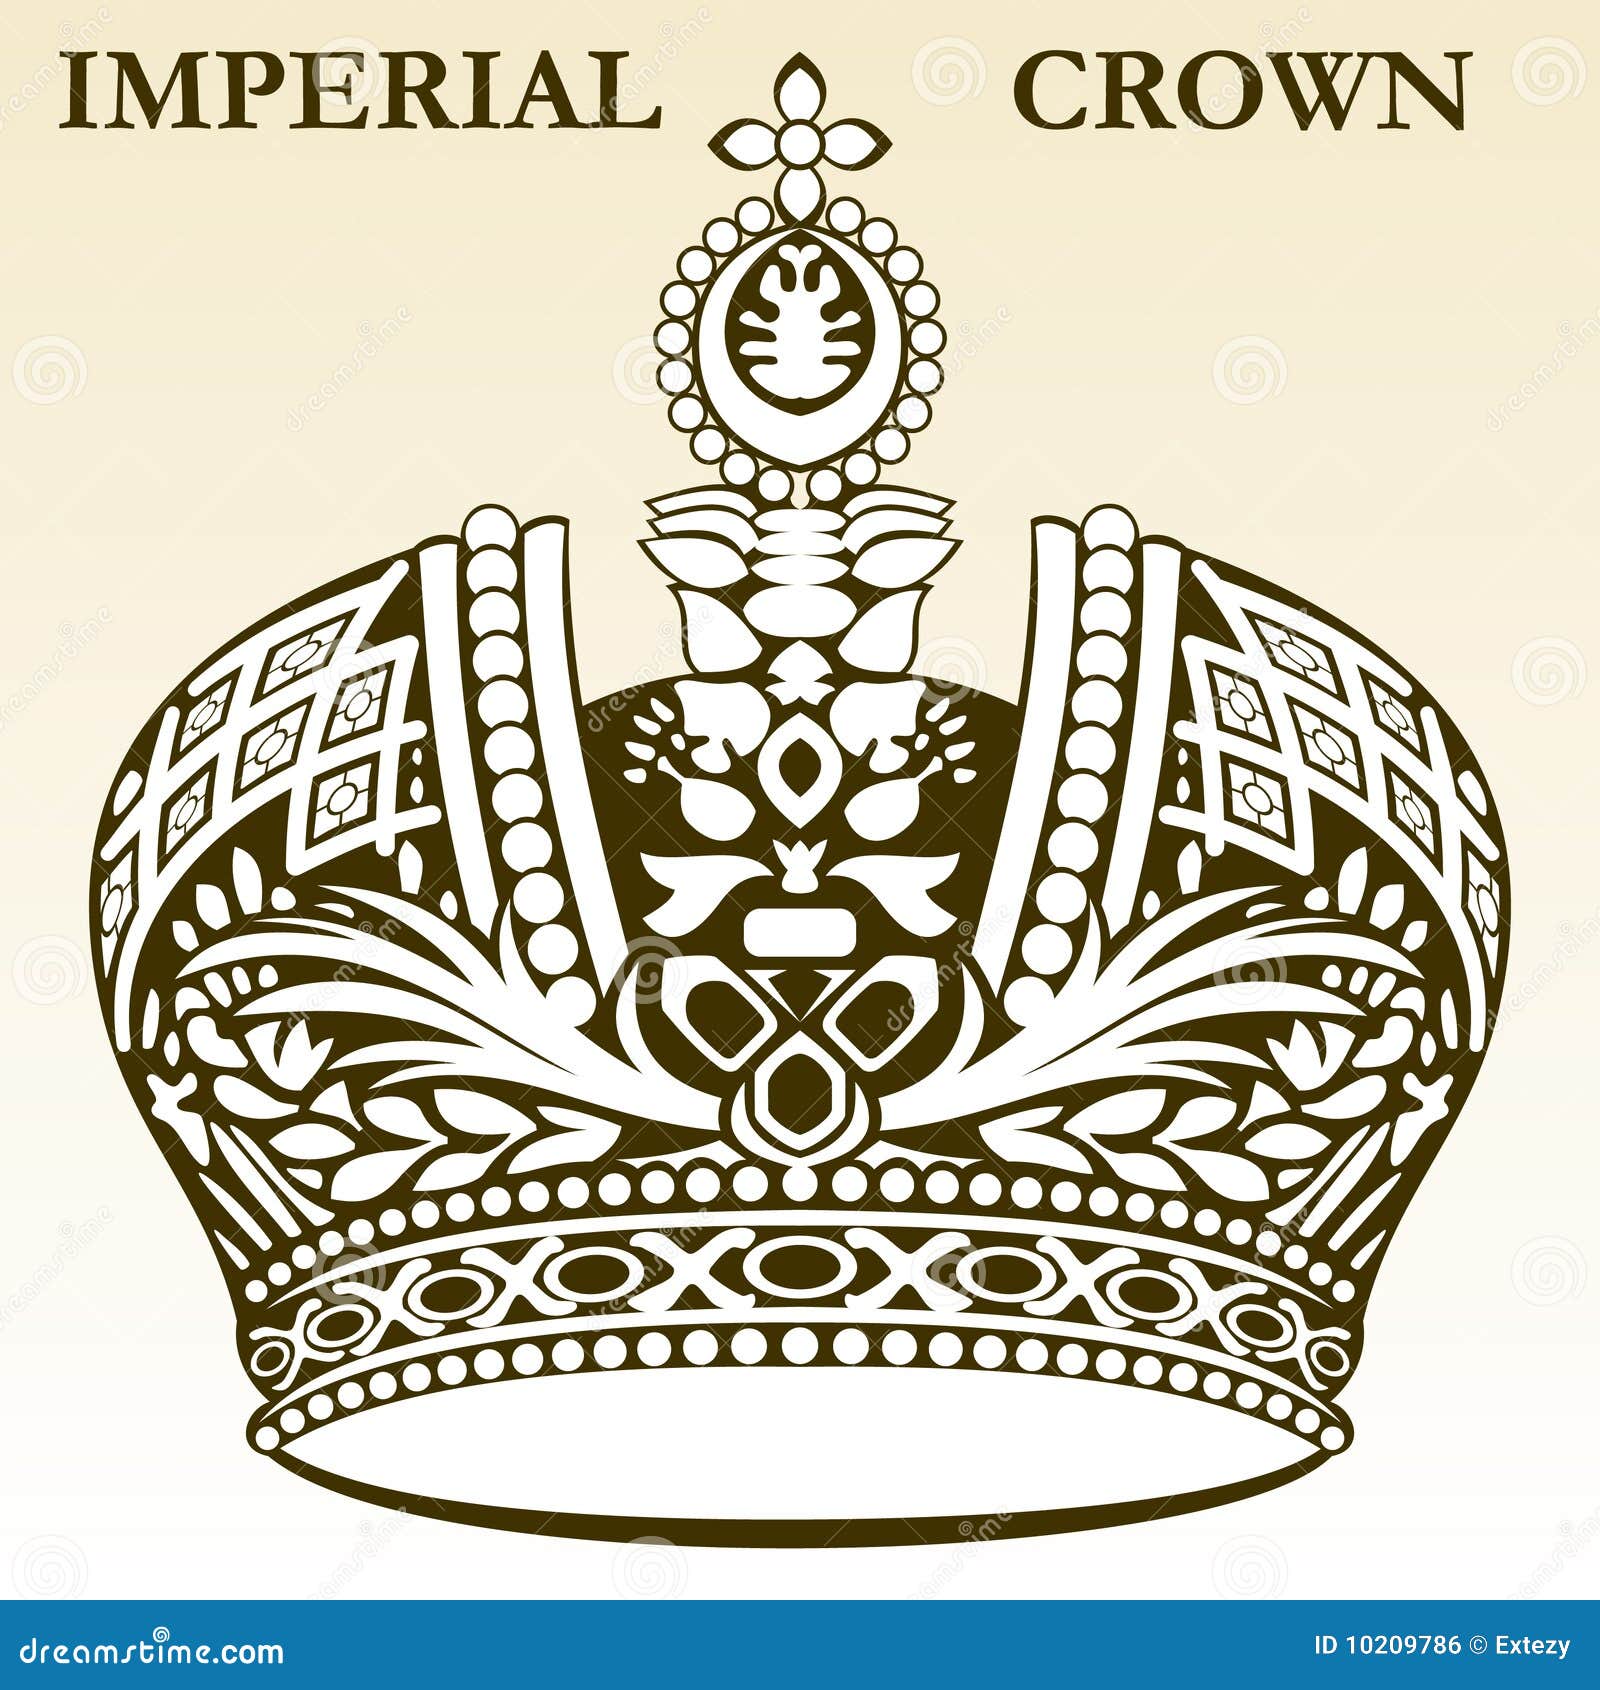 imperial crown white